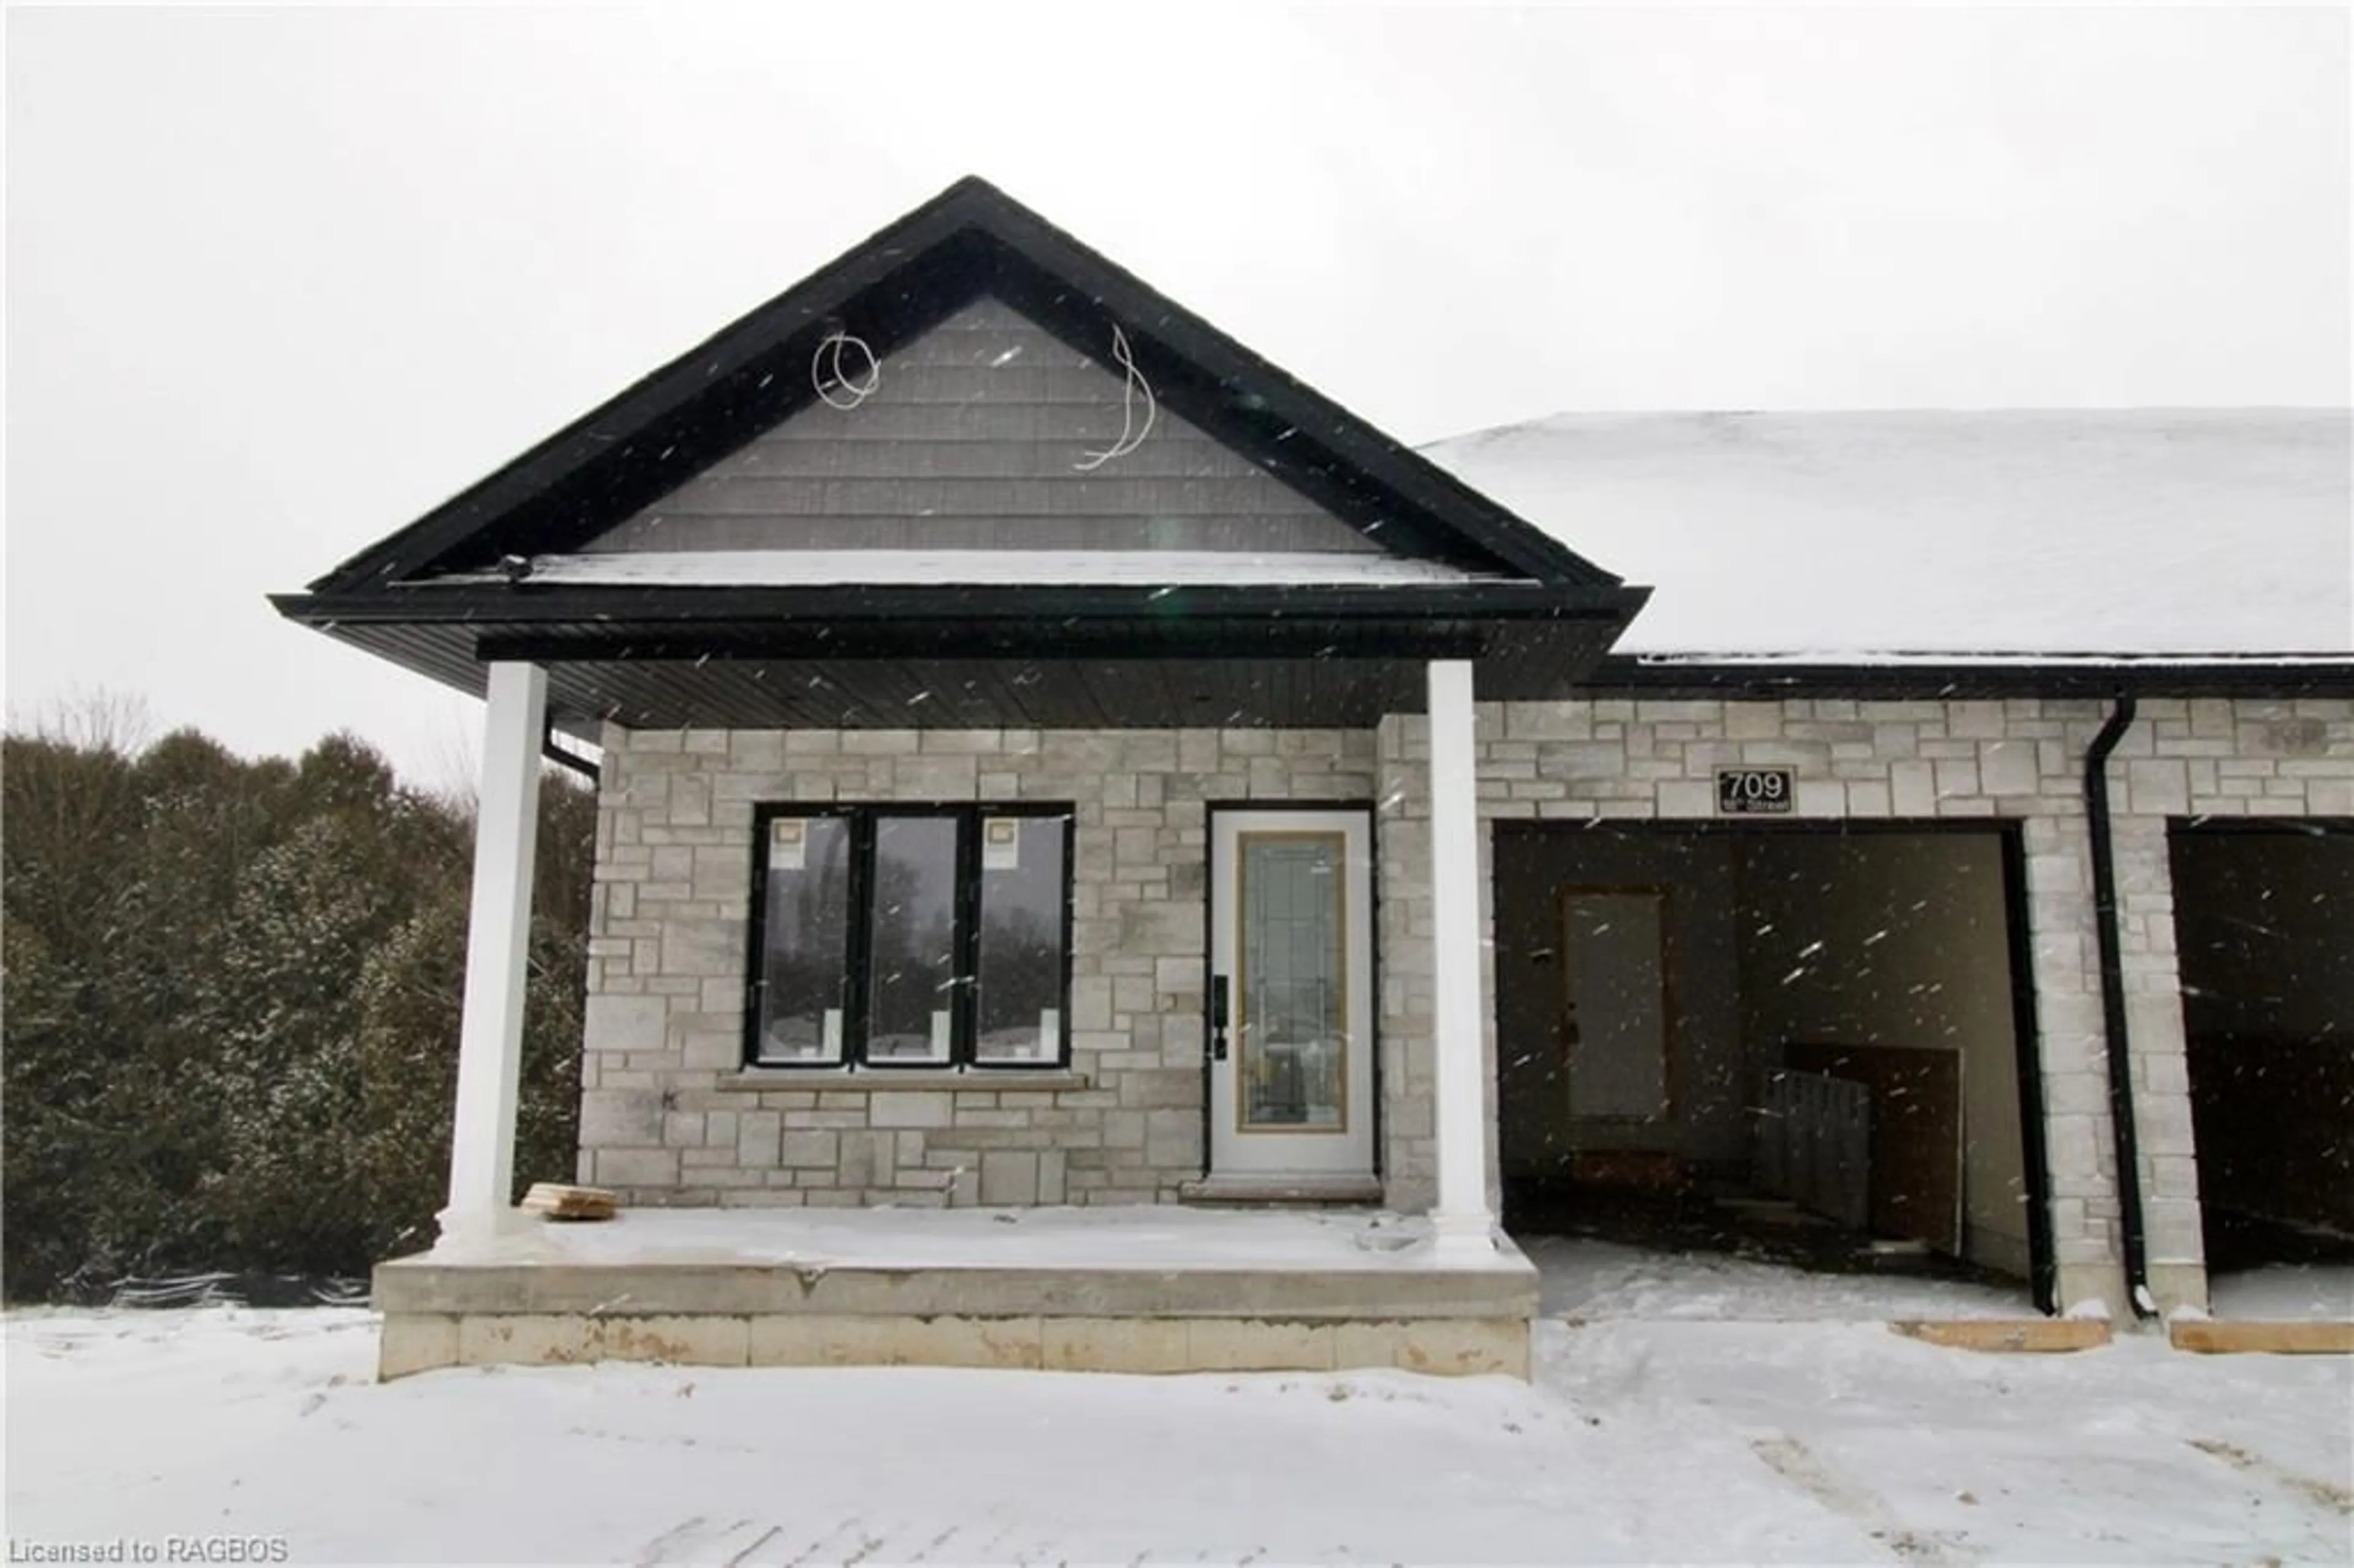 Frontside or backside of a home for 709 18th Street, Hanover Ontario N4N 3B8